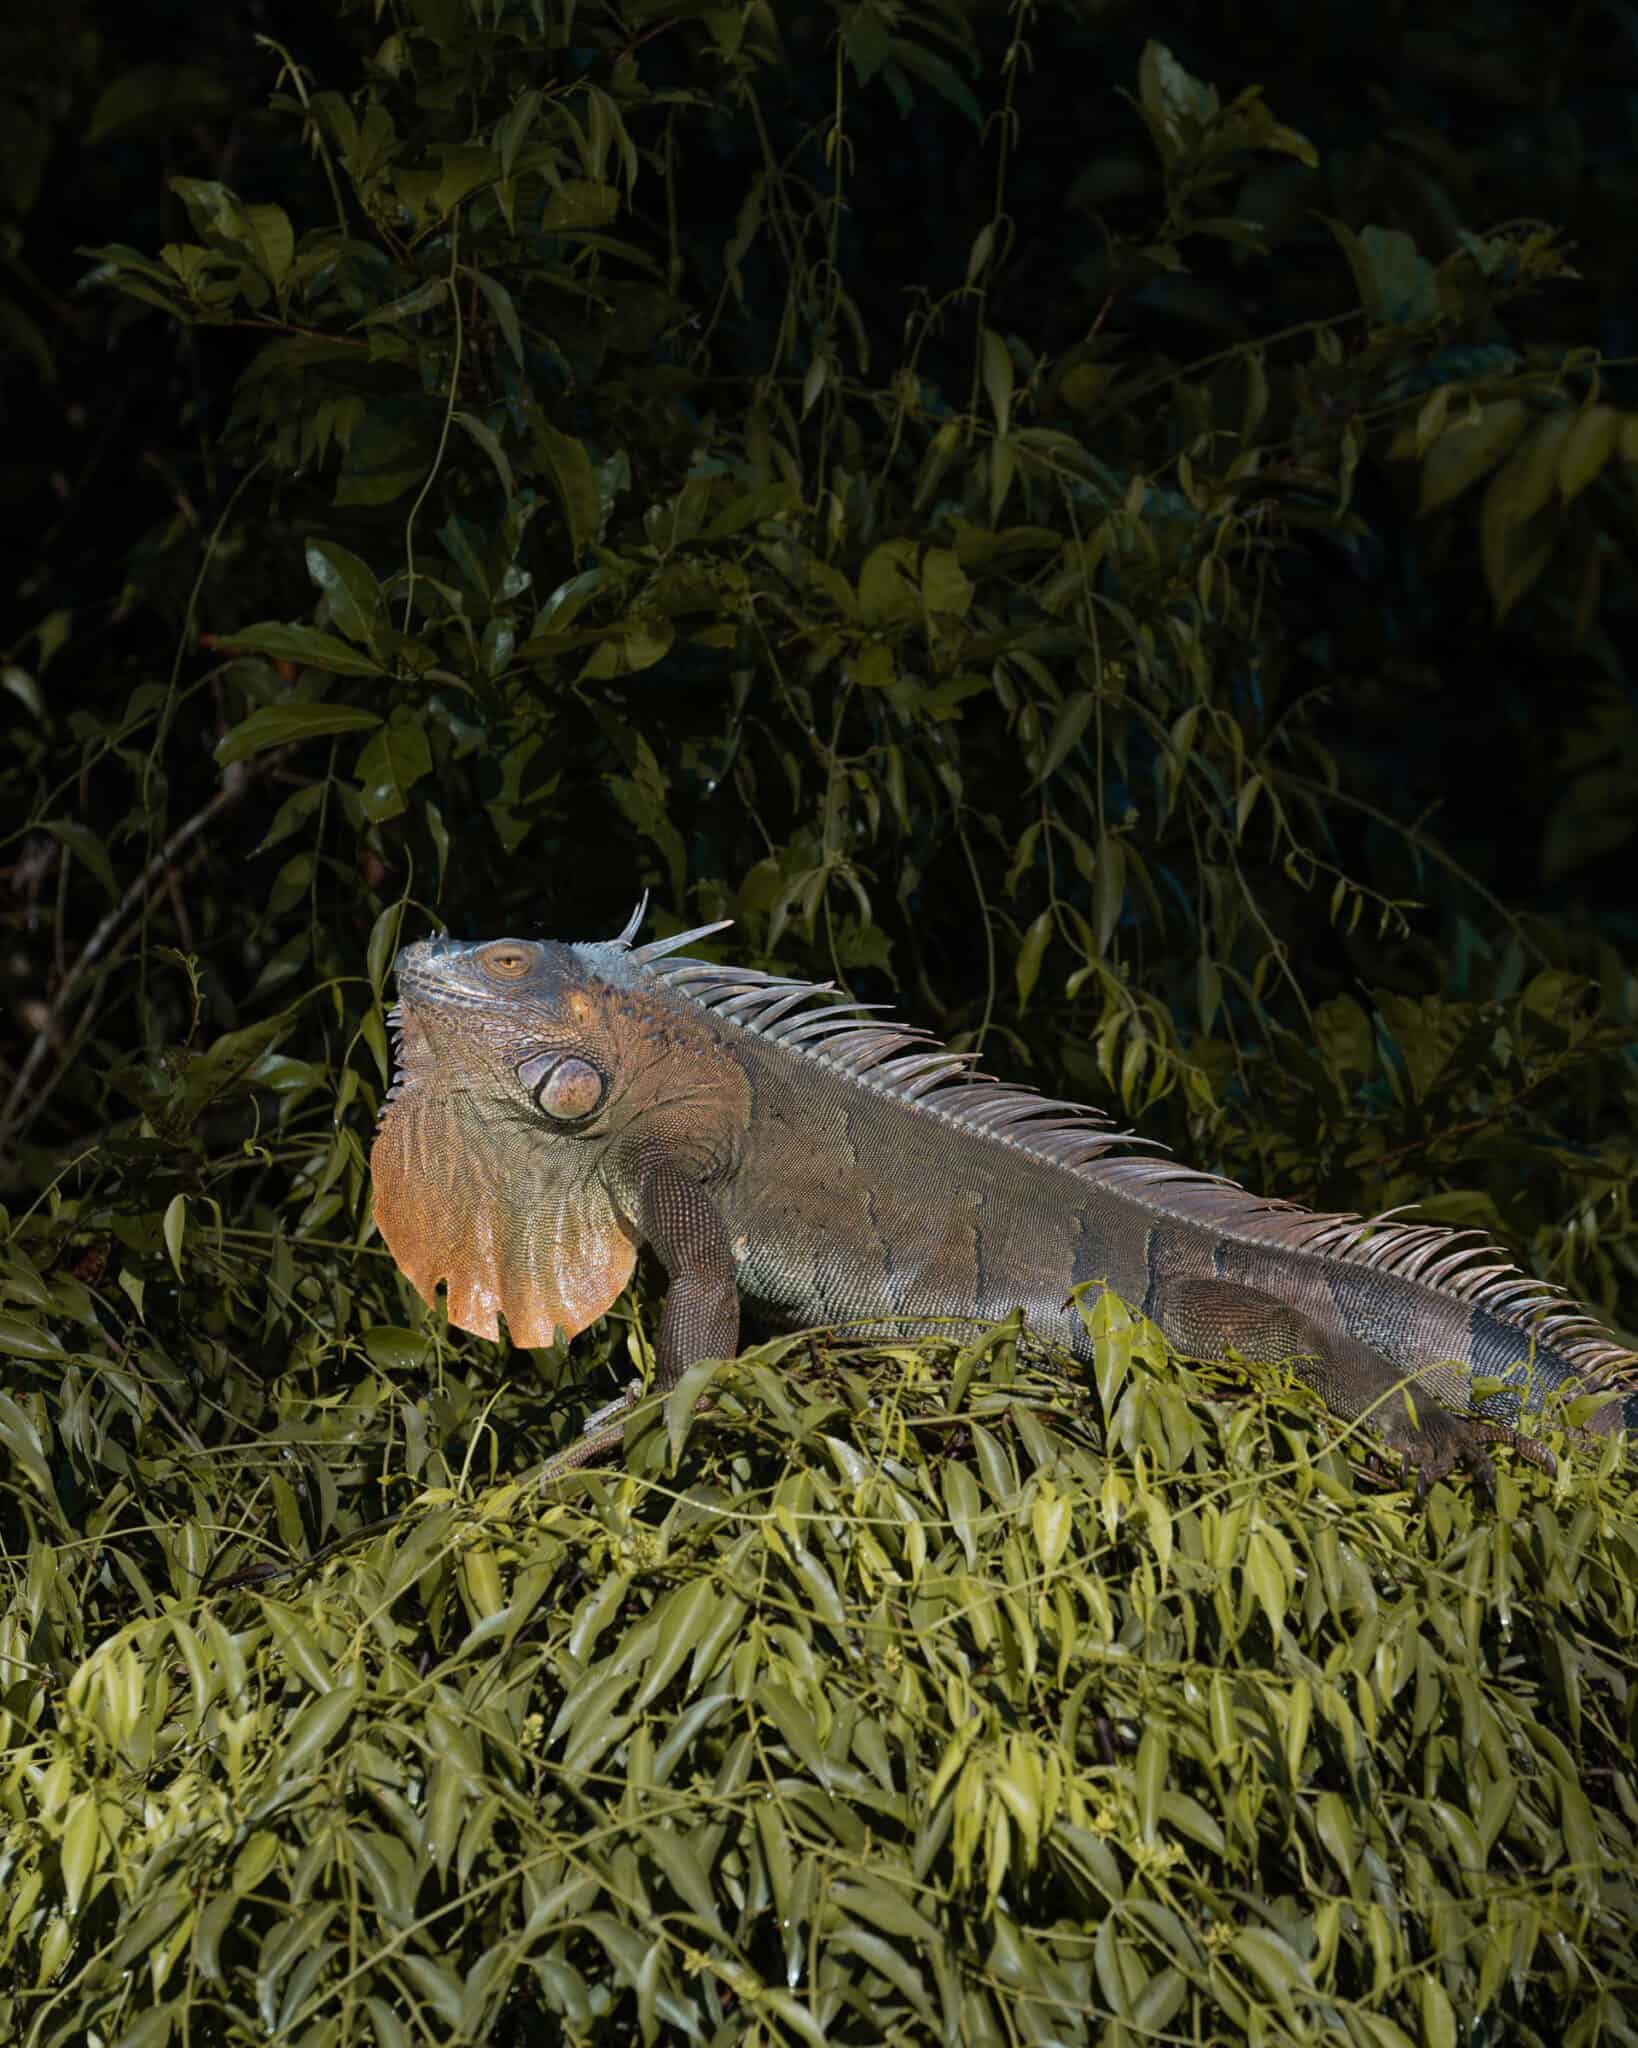 An iguana is sitting on a branch in Tortuguero, Costa Rica.